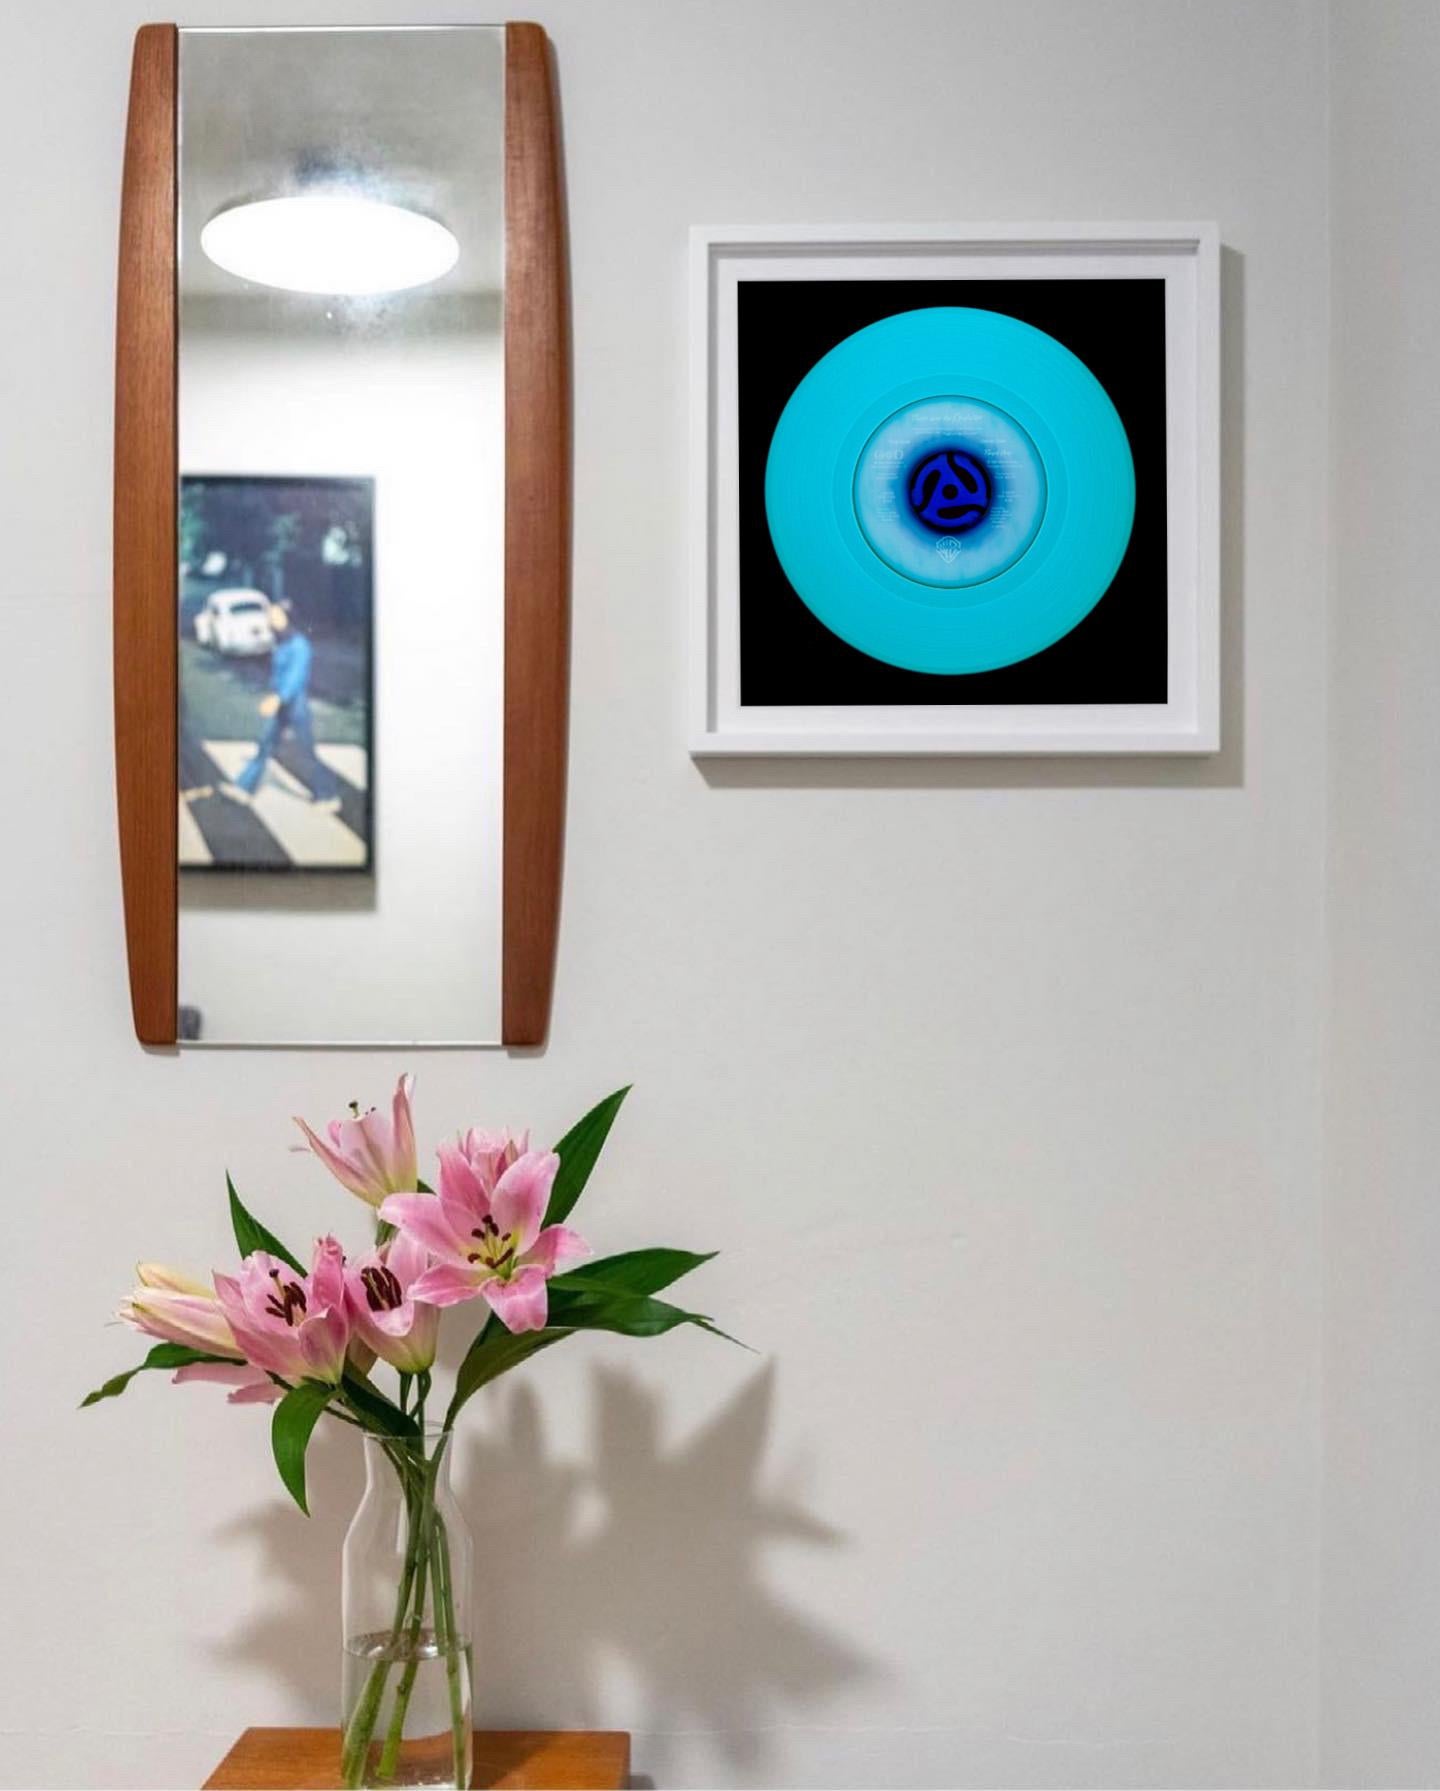 Vinyl Collection, Other Side (Blue) - Conceptual Pop Art Color Photography - Black Print by Heidler & Heeps